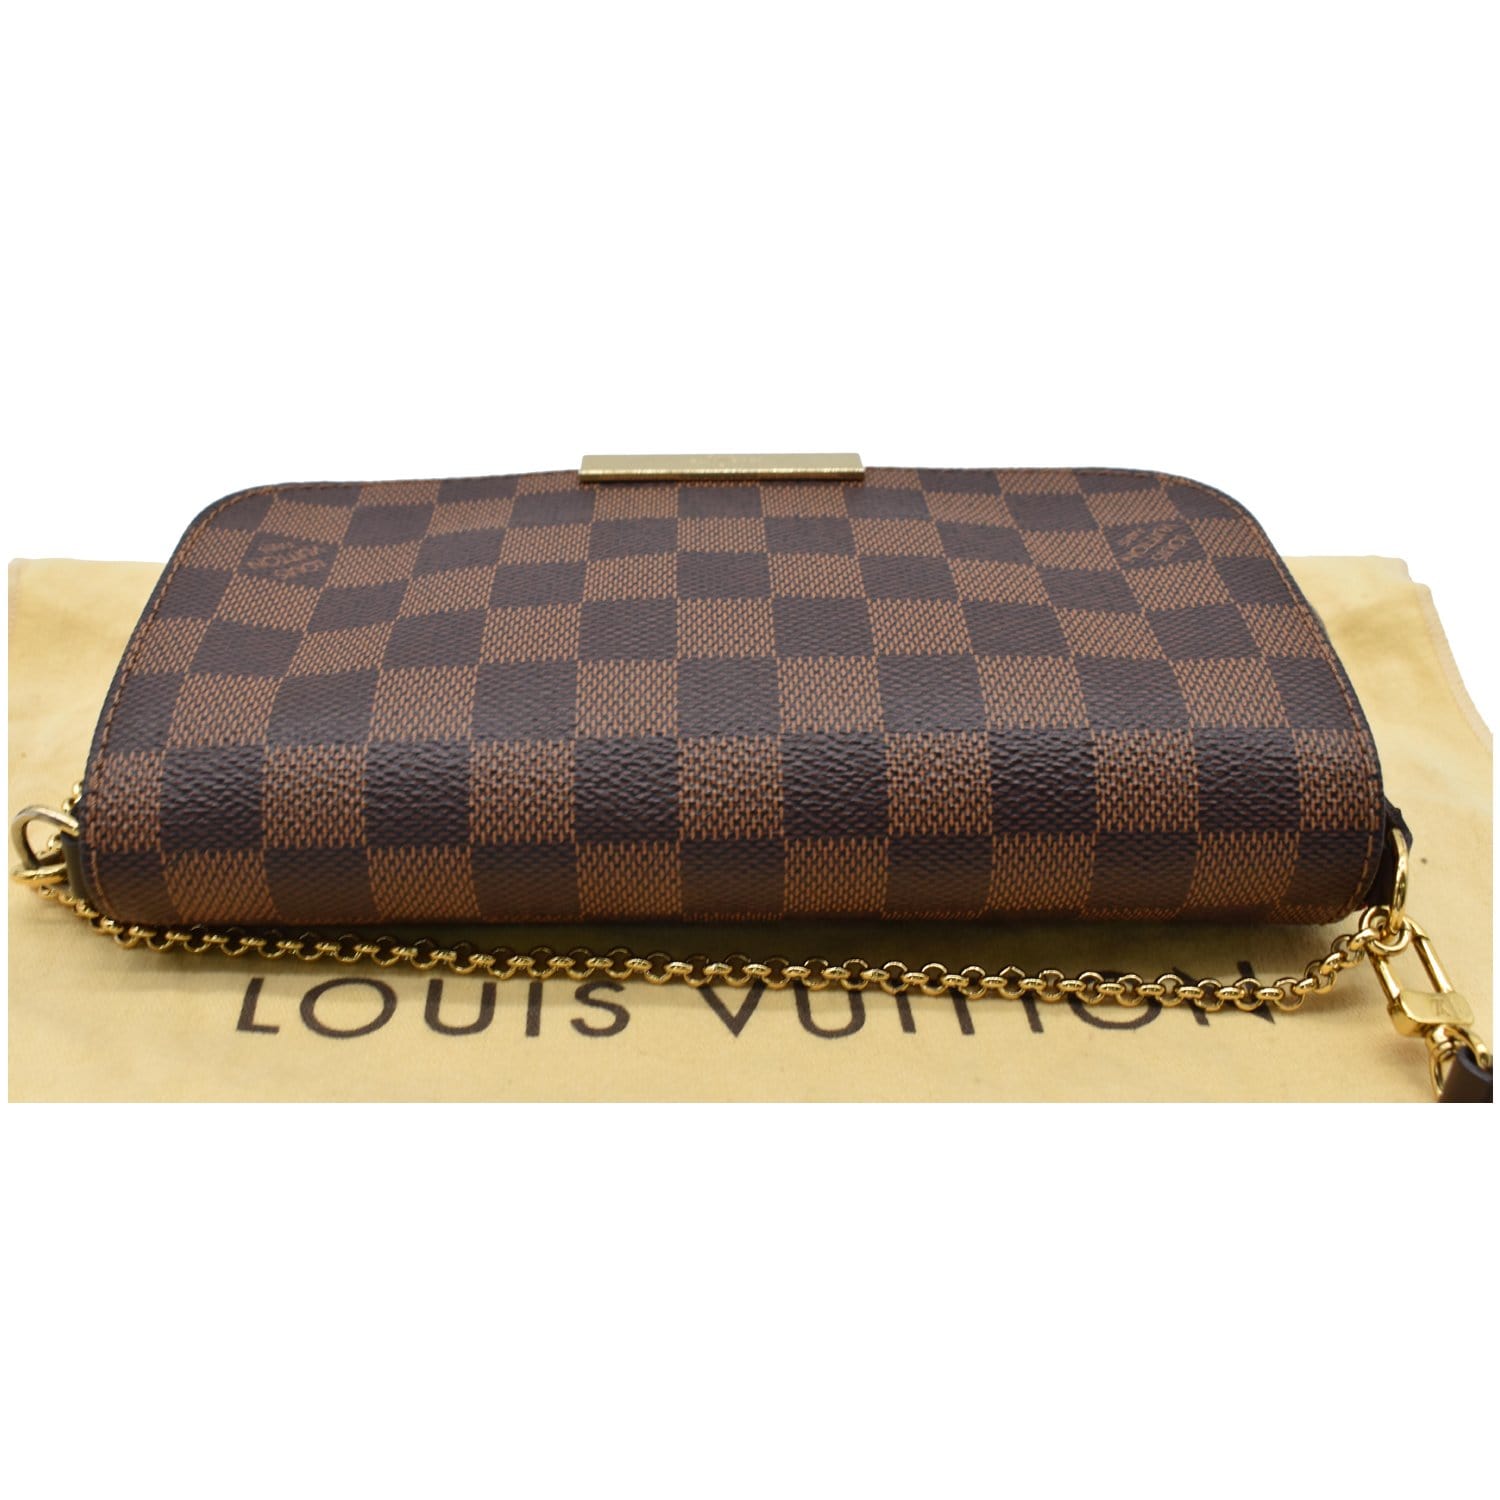 Authentic Louis Vuitton Favorite PM Damier Ebene Crossbody Purse  Louis  vuitton favorite pm, Purses crossbody, Thrift store outfits